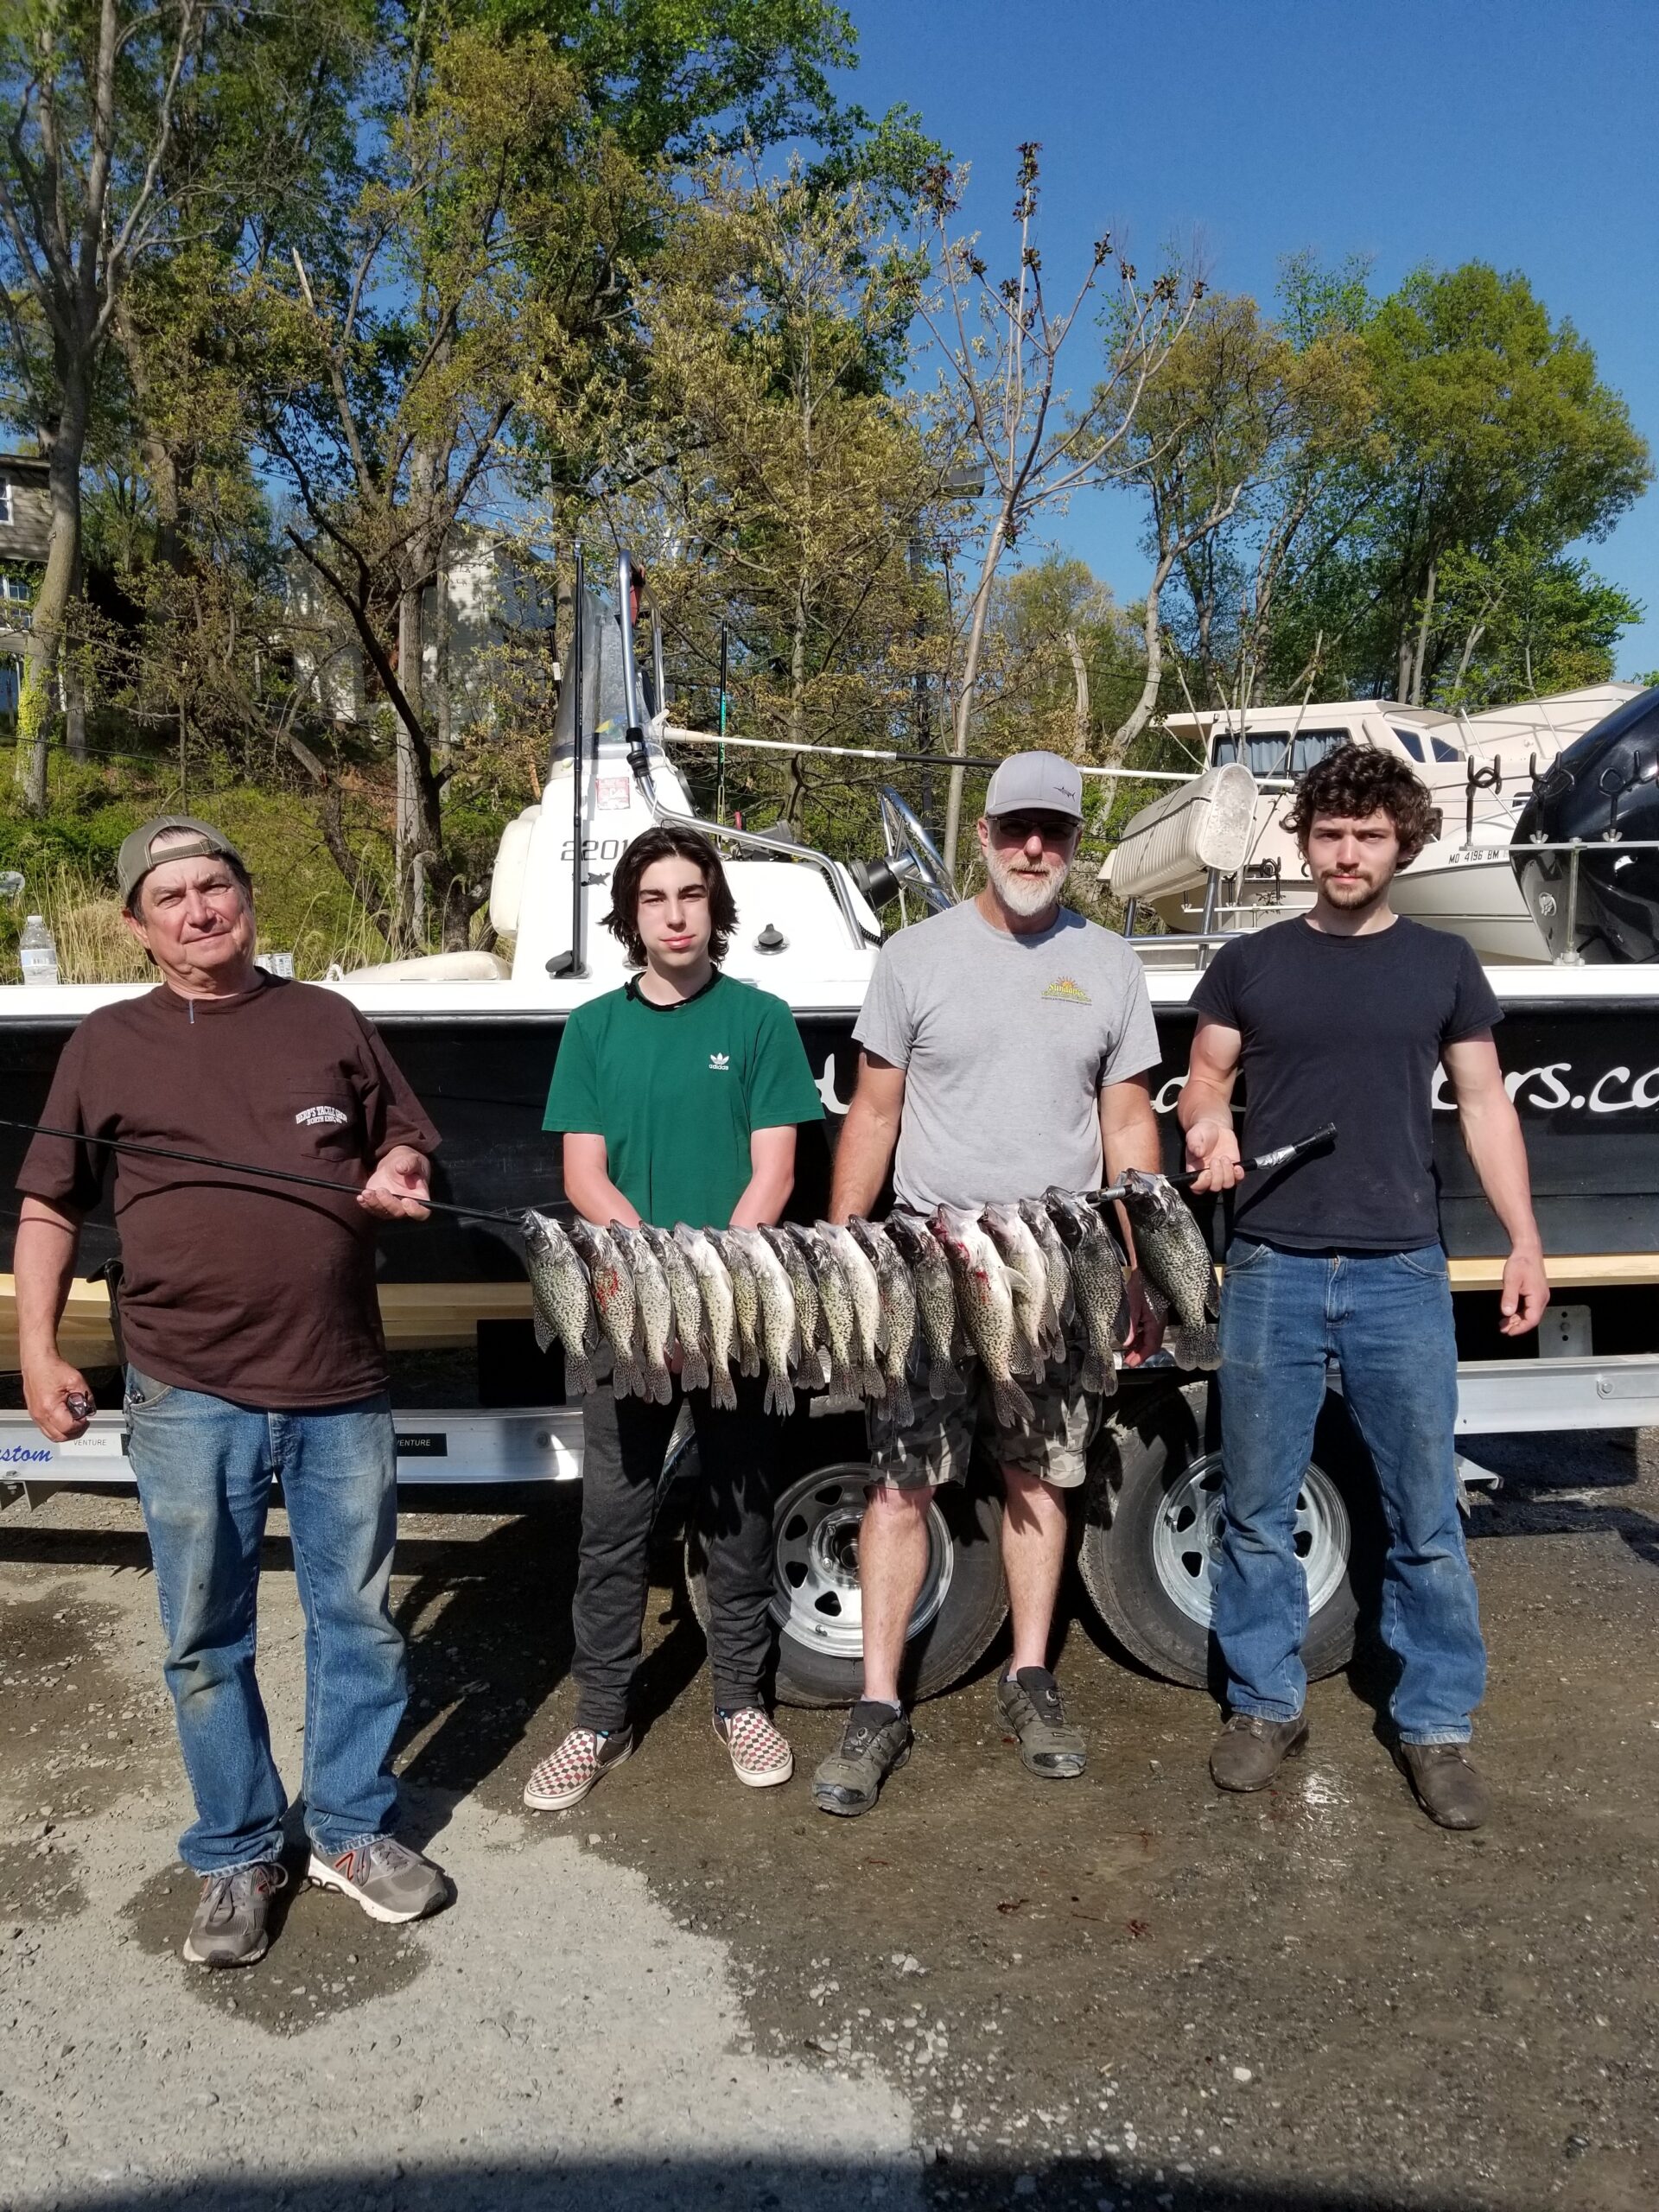 https://indianheadcharters.com/wp-content/uploads/2022/05/42422-scaled.jpg